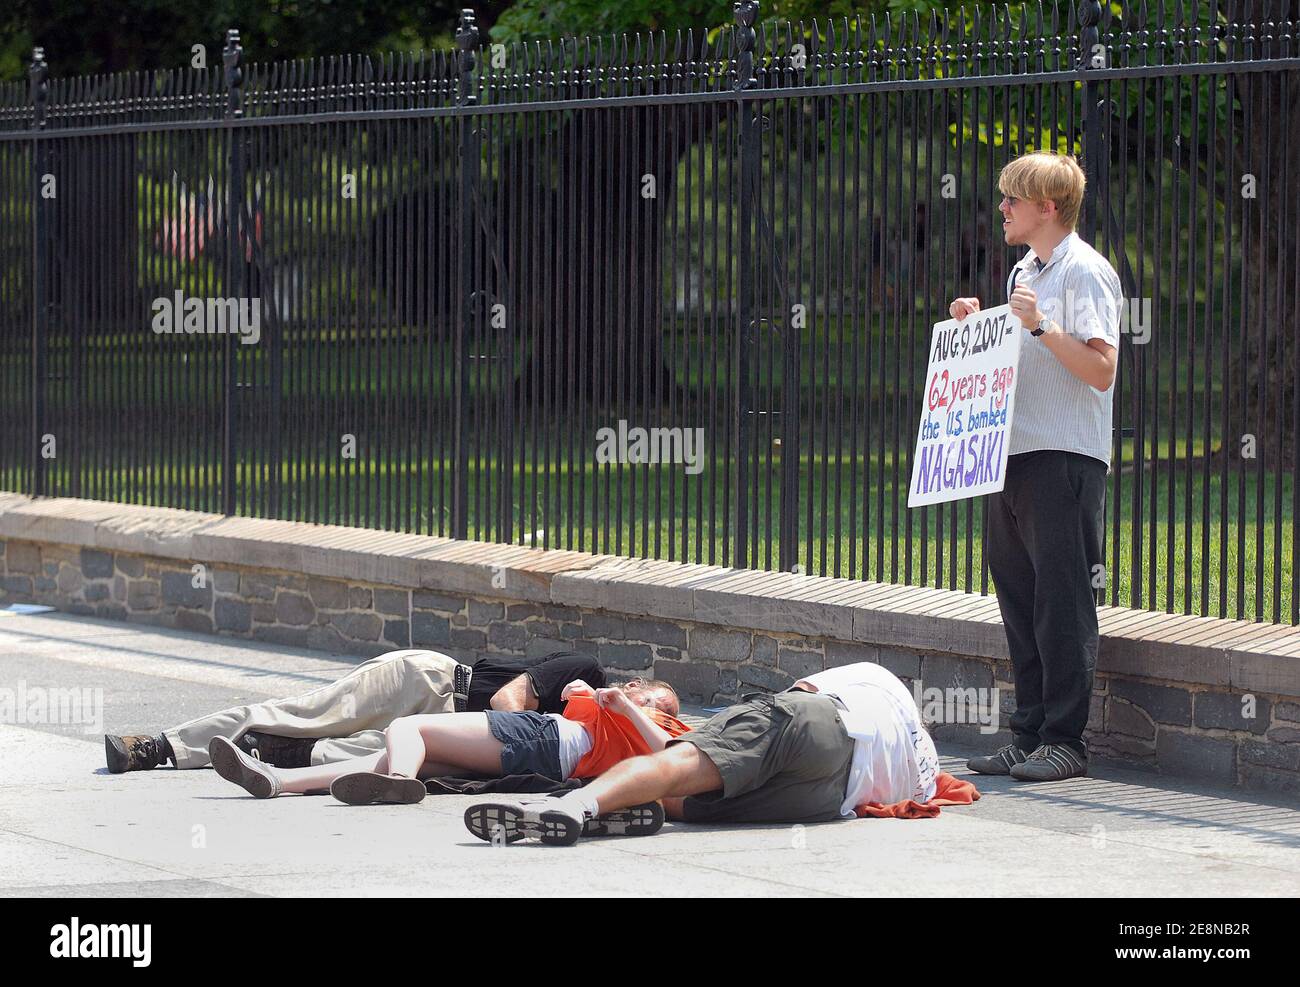 Peace activists commemorate anniversaries of the U.S. atomic bombings of Hiroshima and Nagasaki in front of the White House, in Washington, DC, USA, on August 9, 2007. Nagasaki was struck by an atomic bomb on August 9, 1945. Photo by Olivier Douliery/ABACAPRESS.COM Stock Photo